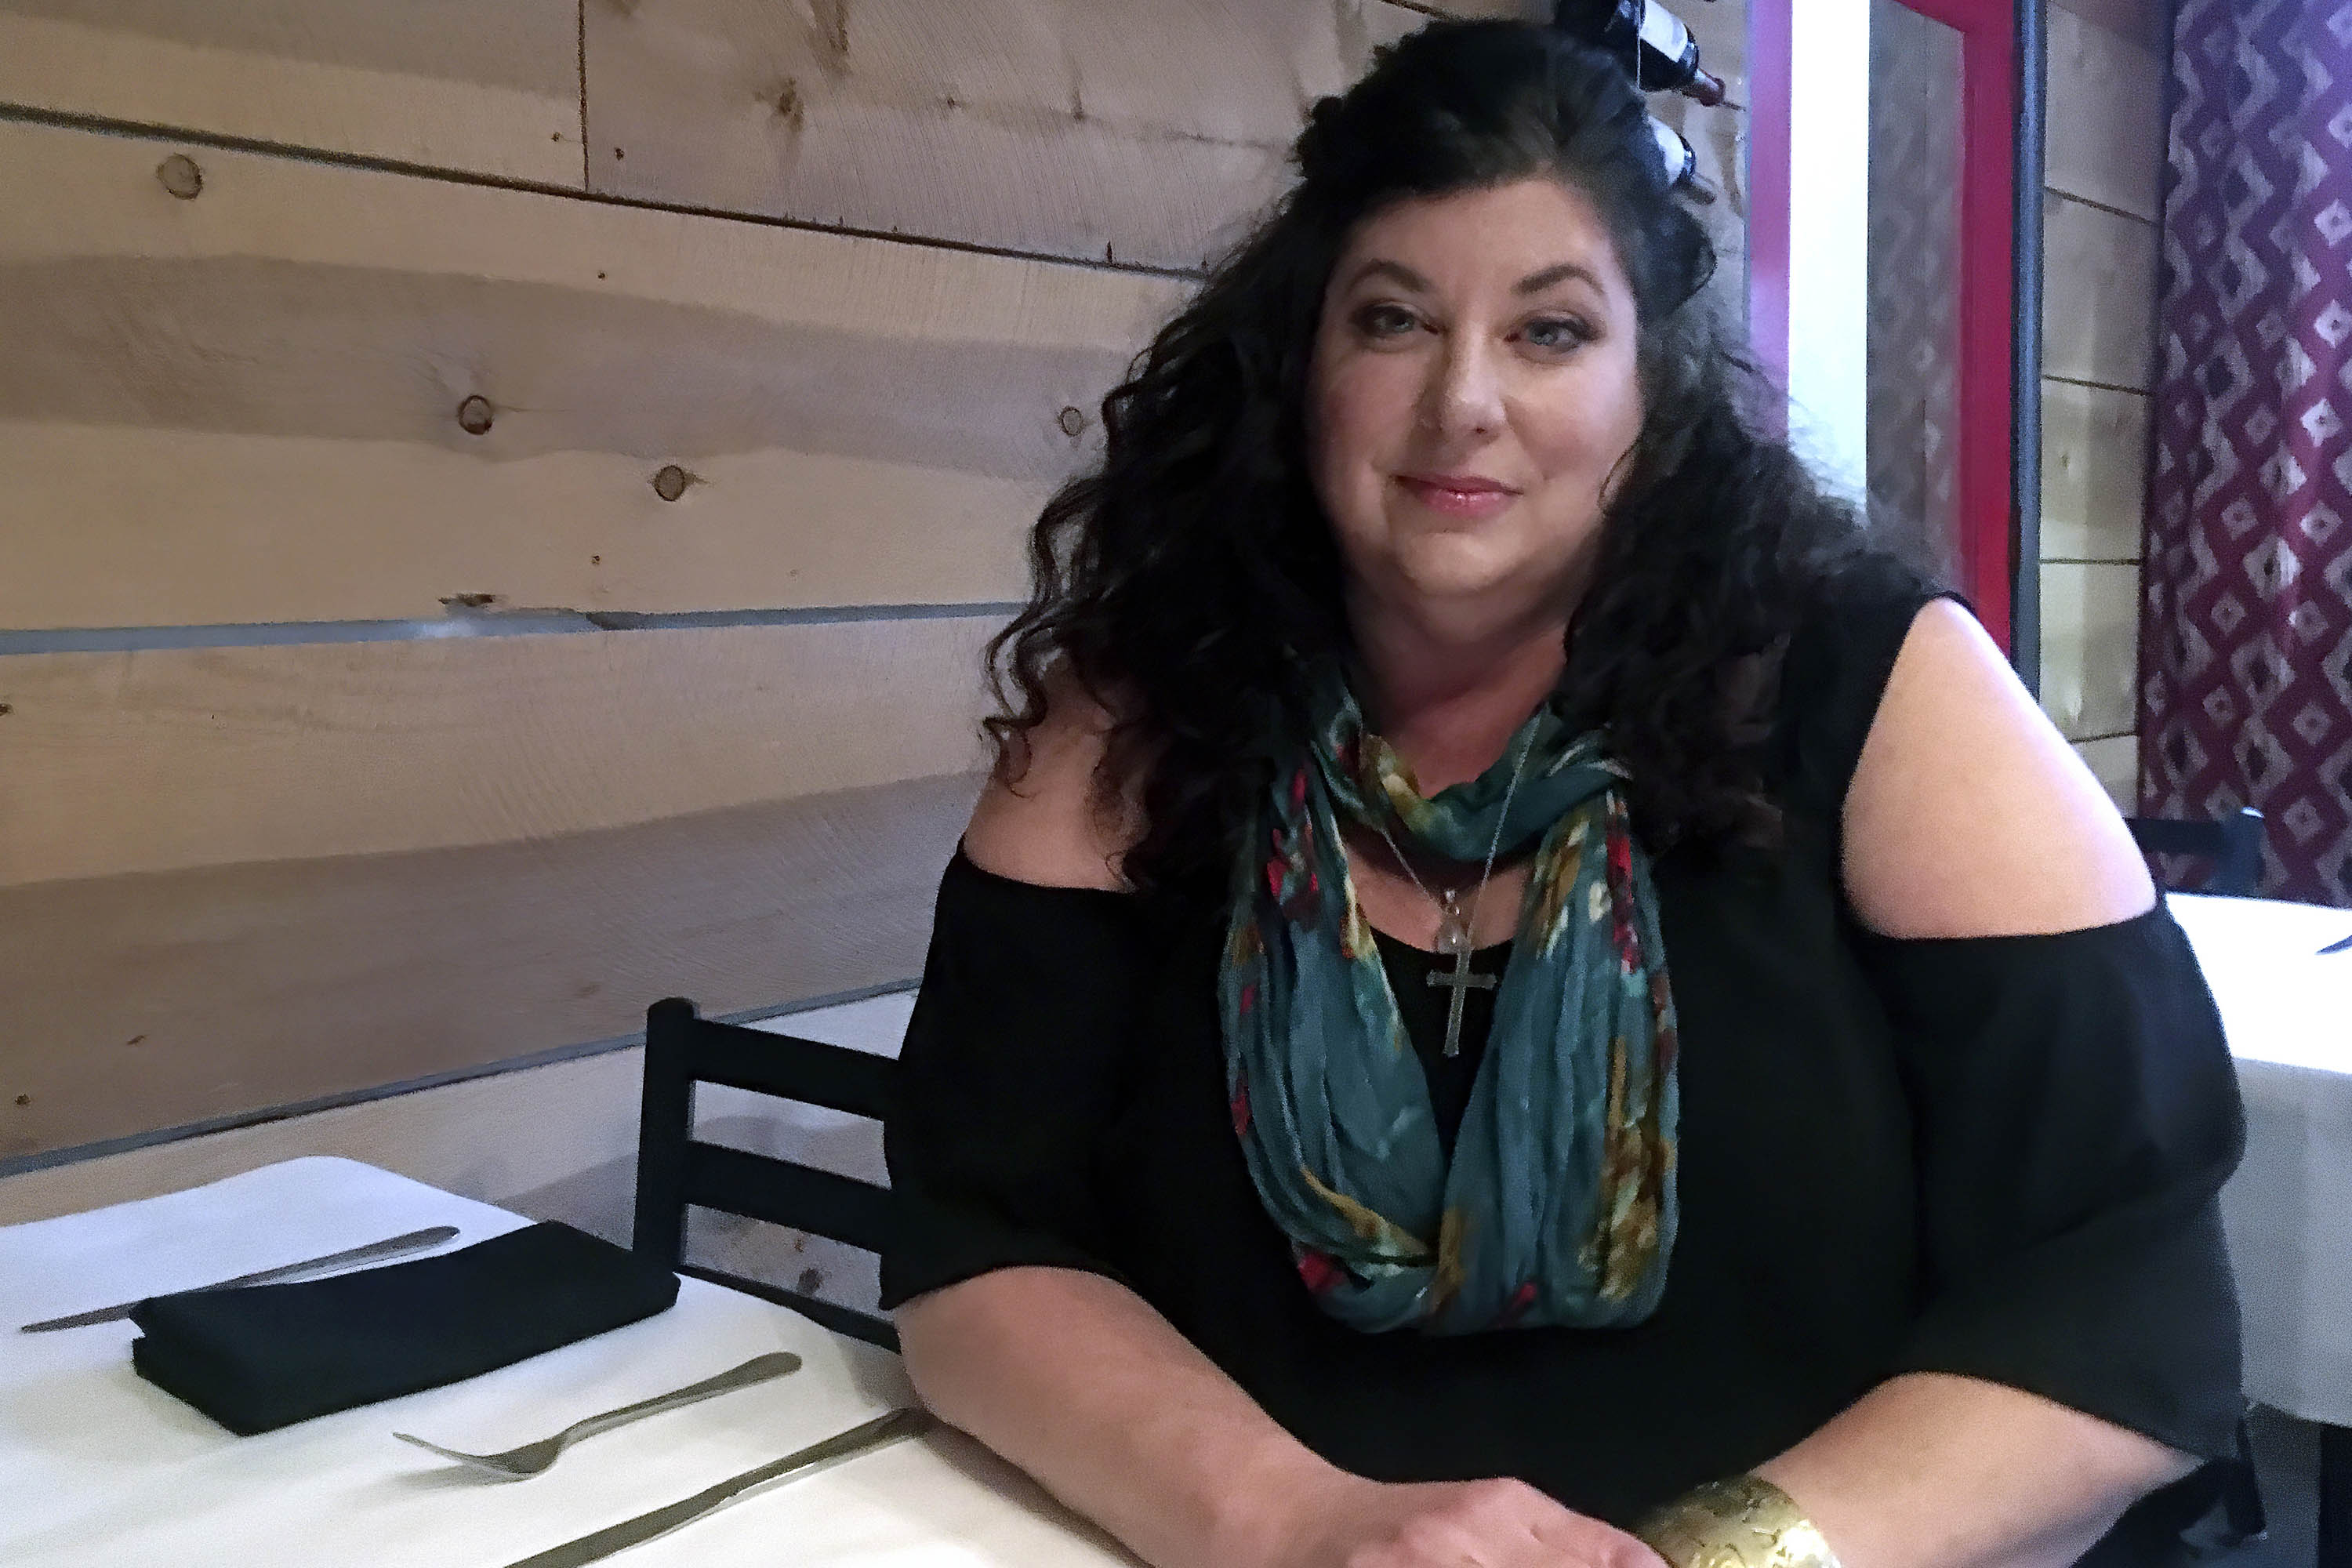 Tara Reade is pictured during an interview in Nevada City, California, in April 2019.